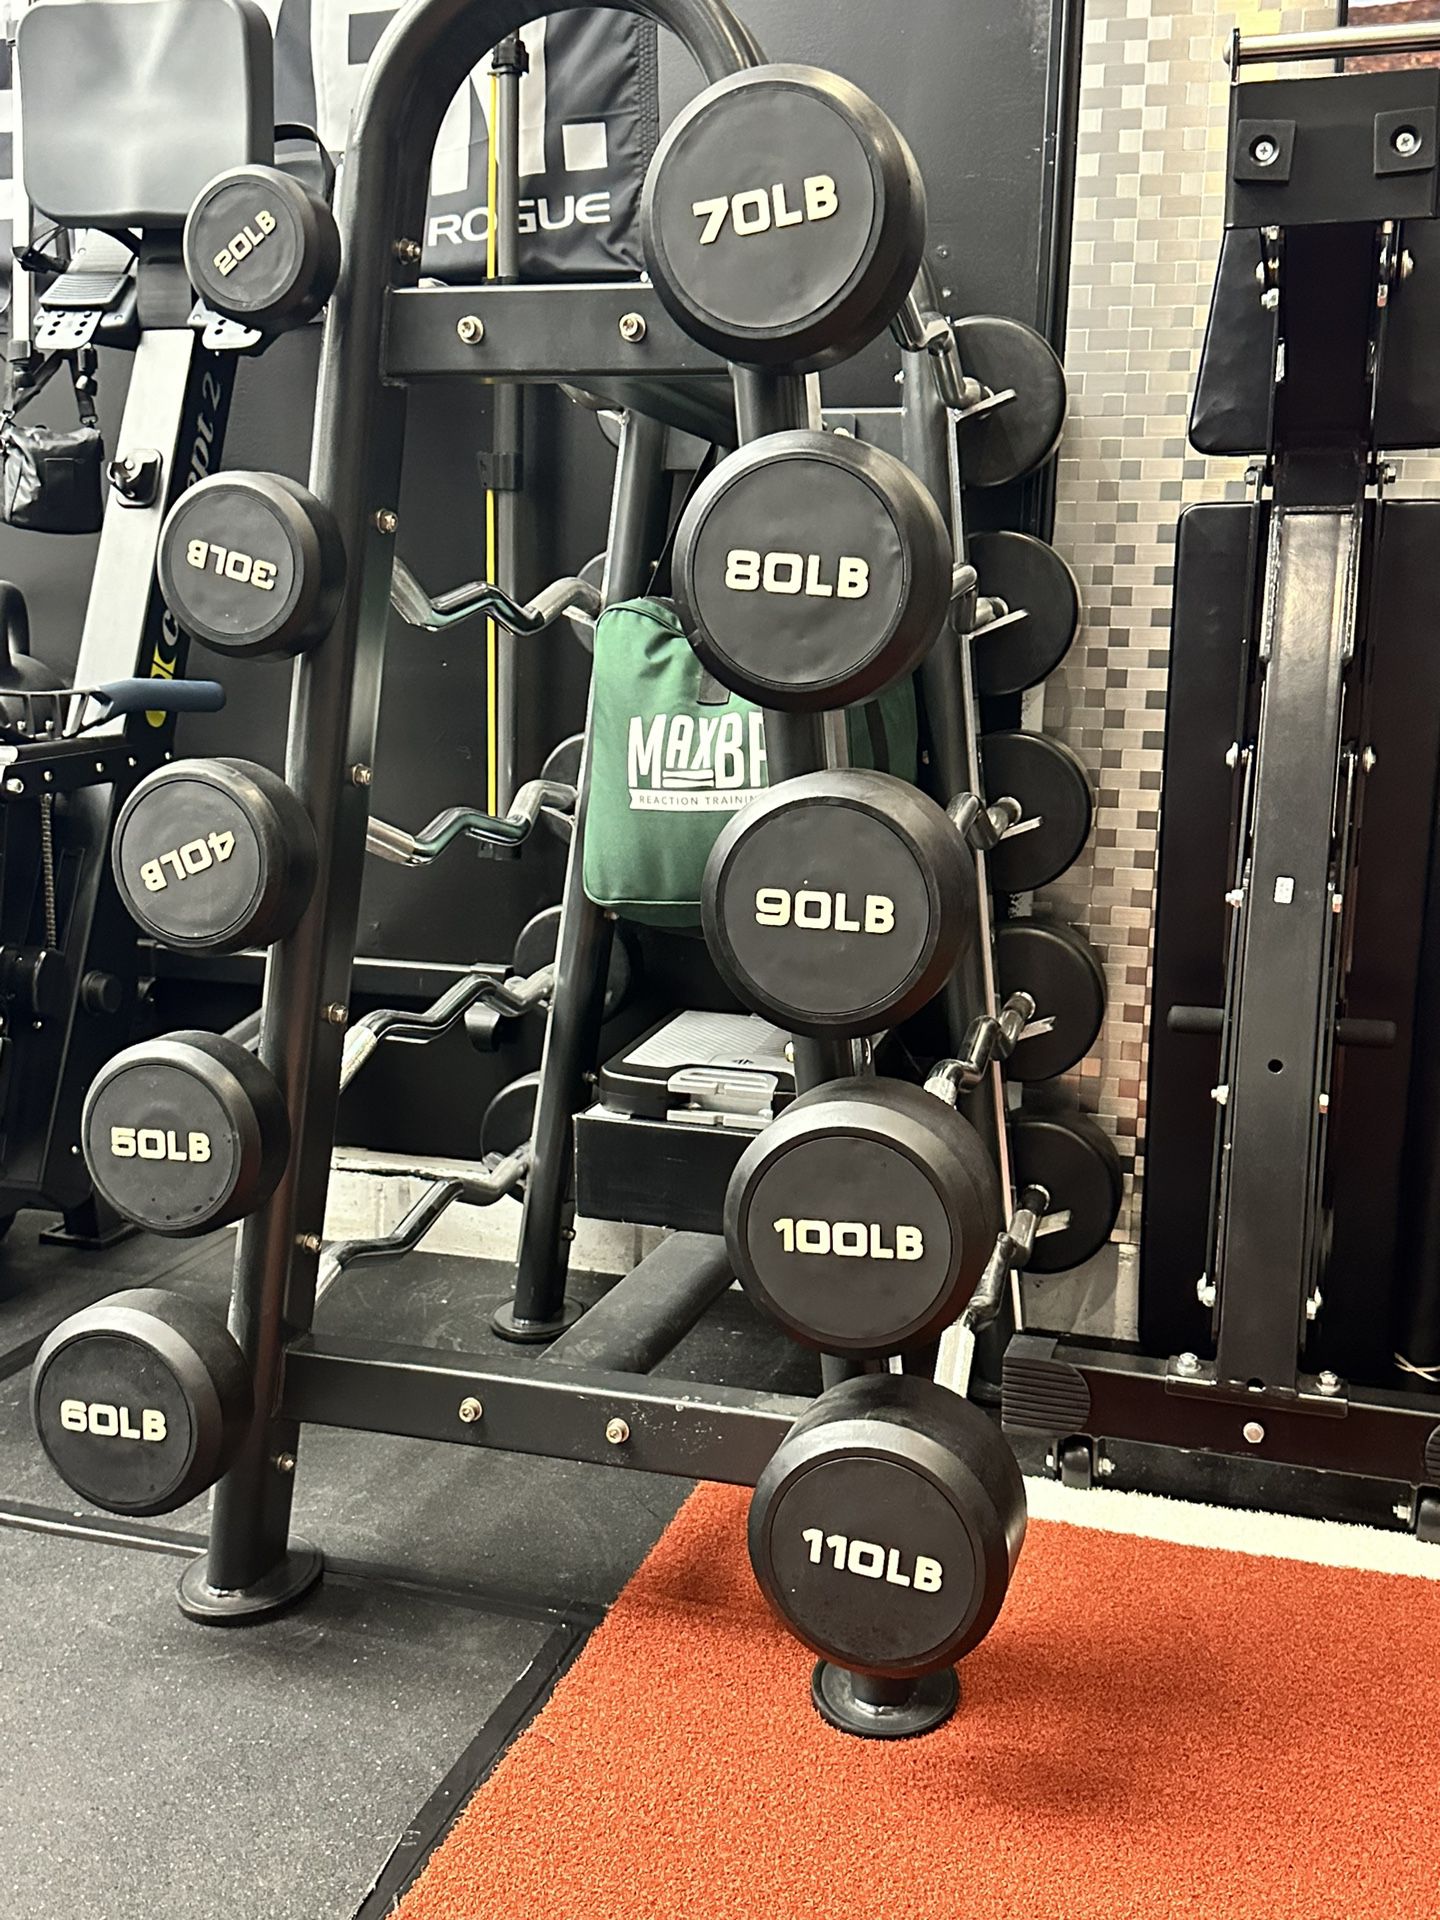 20-110lbs Fixed Curl Bar Set And Rack